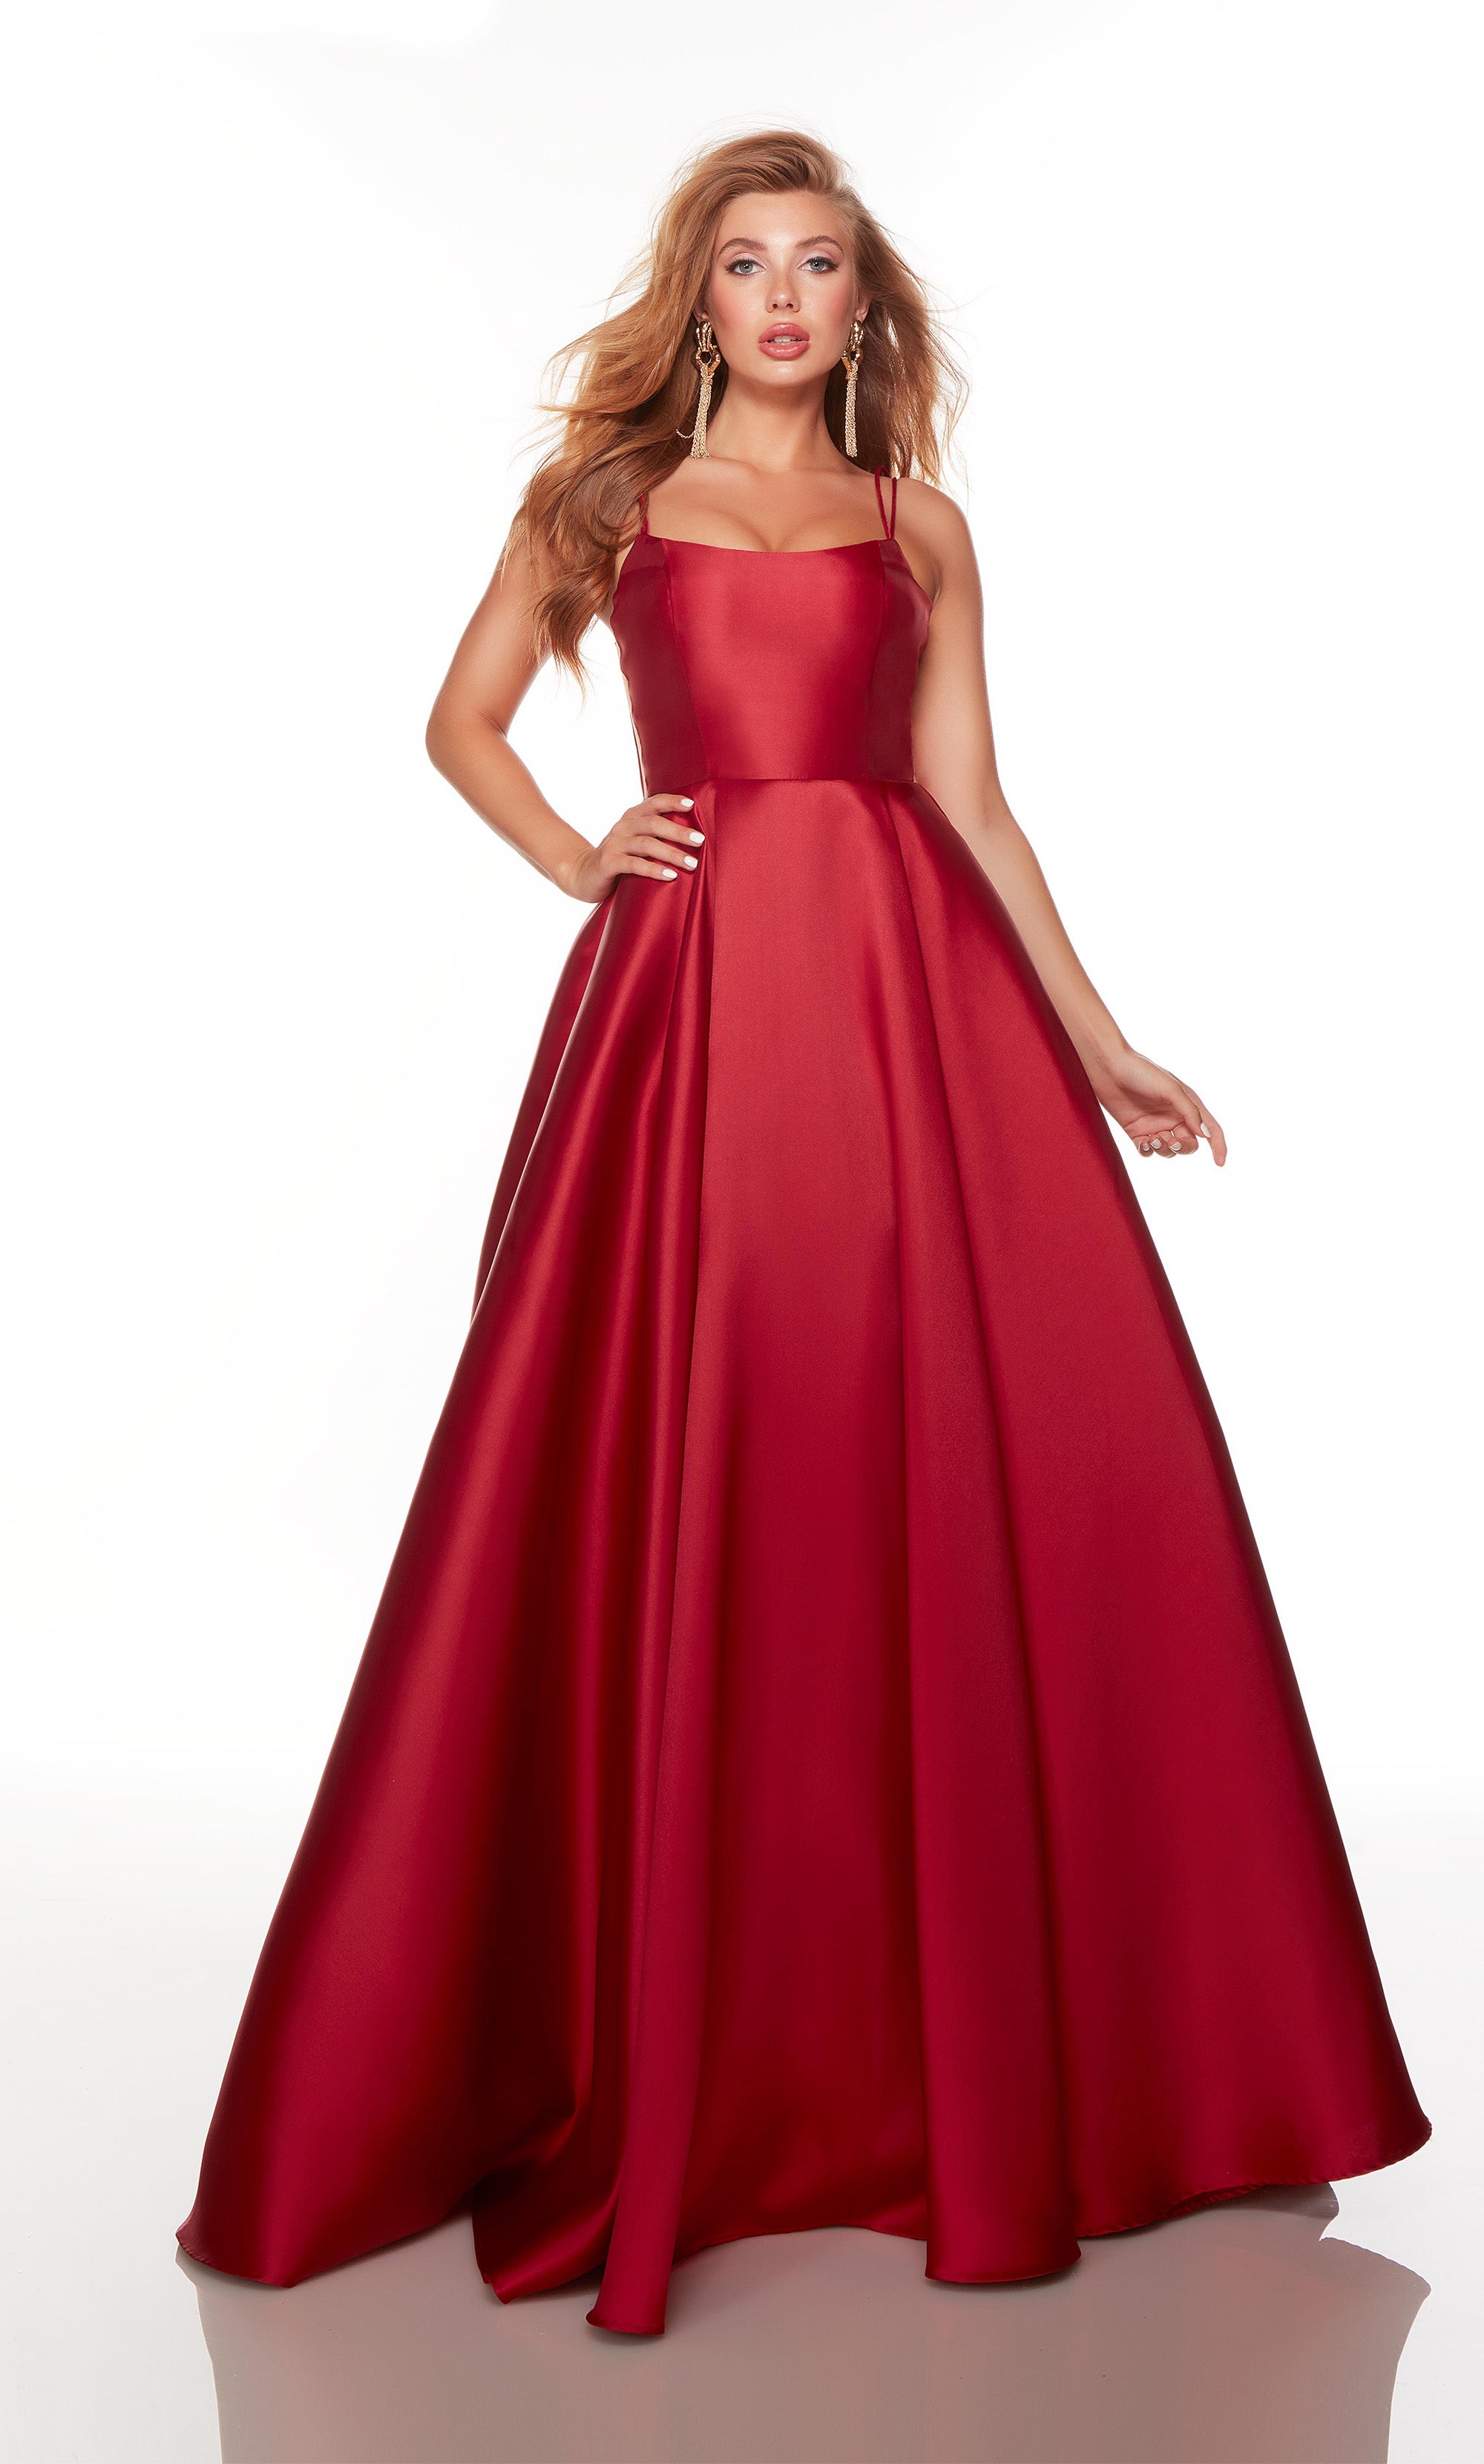 Breaking Bridal Stereotypes with a Stunning Red Gown